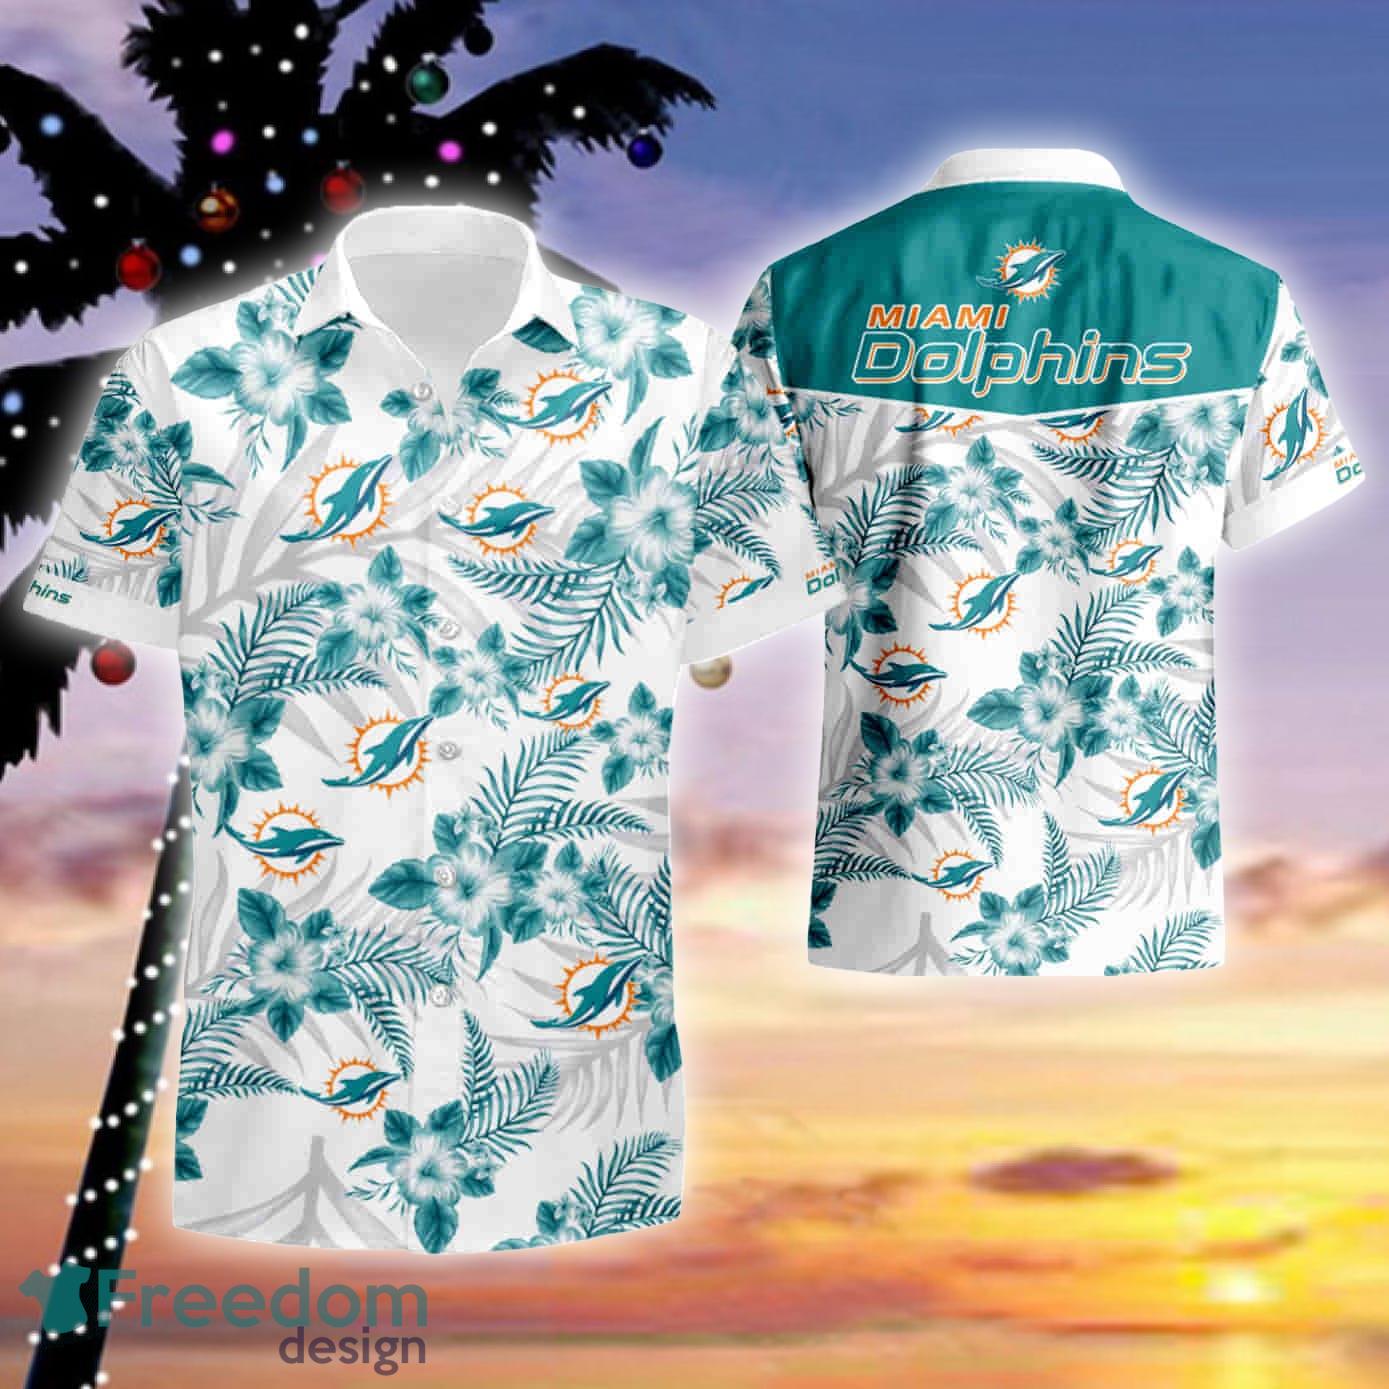 miami dolphins father's day gift